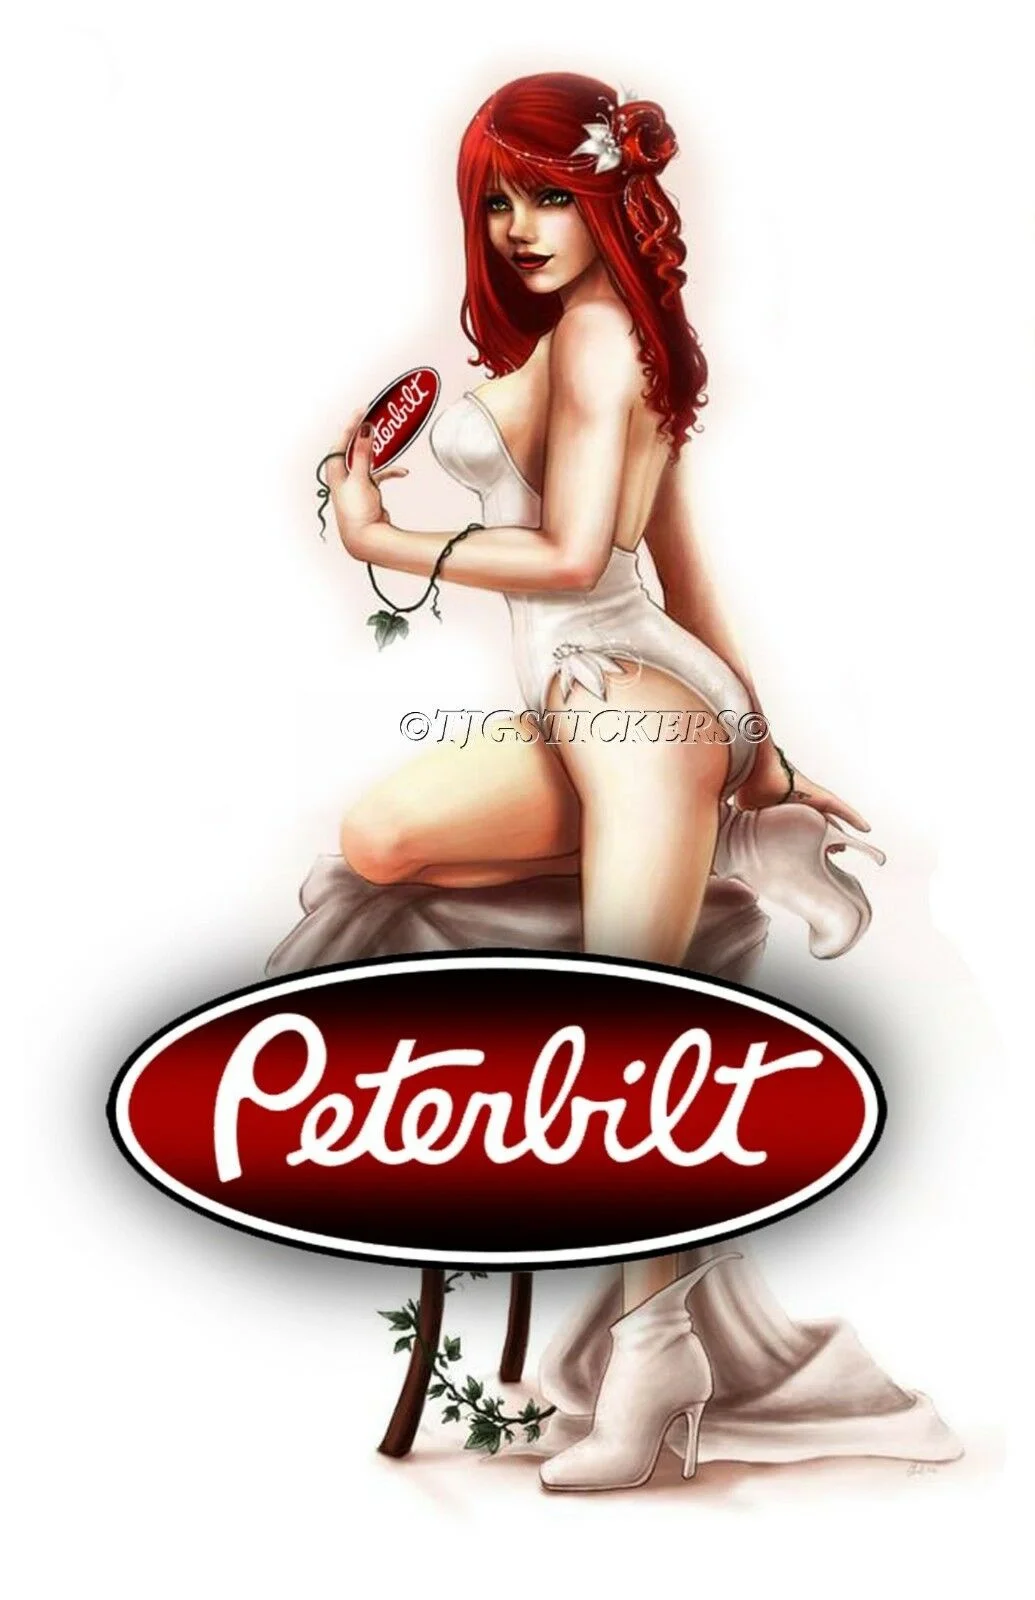 For peterbilt feather girl sticker decal truck garage label mancave toolbox thumb200